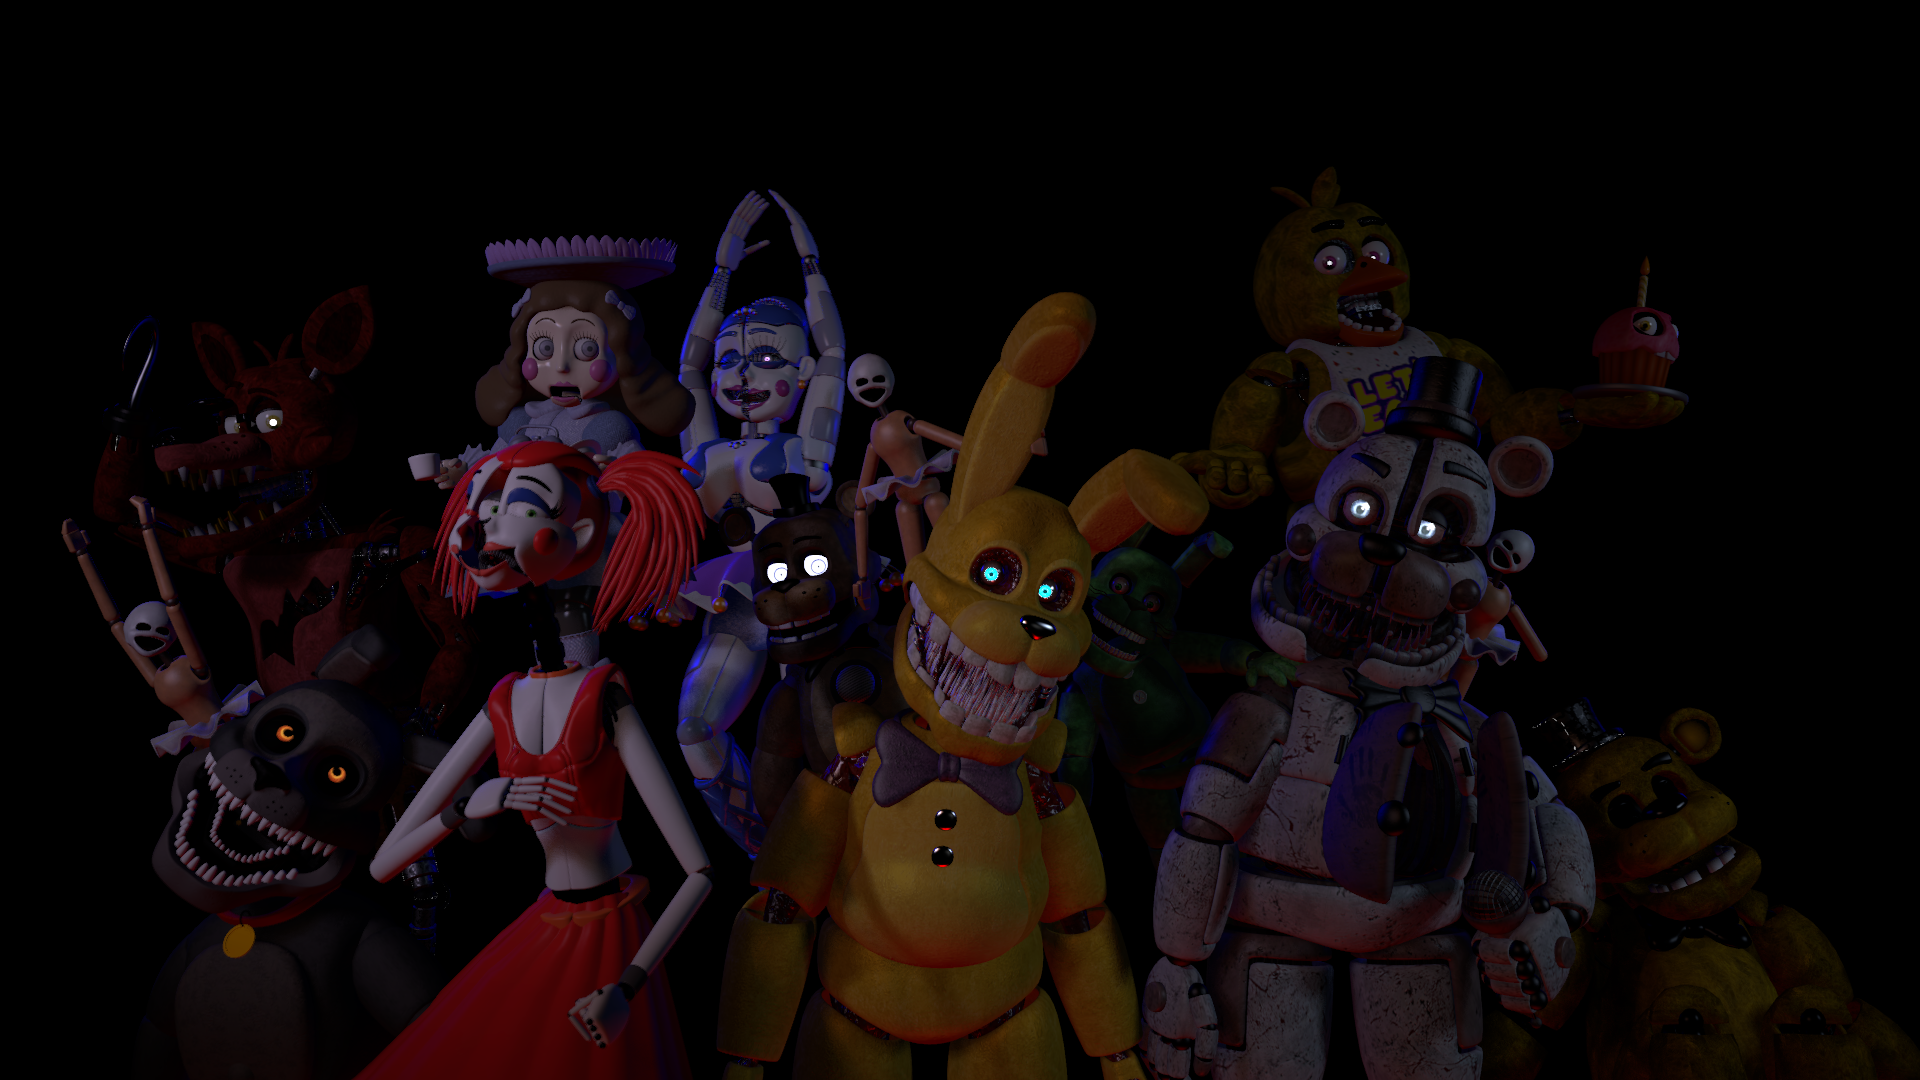 Fazbear's frights SFM render (credits in comments)